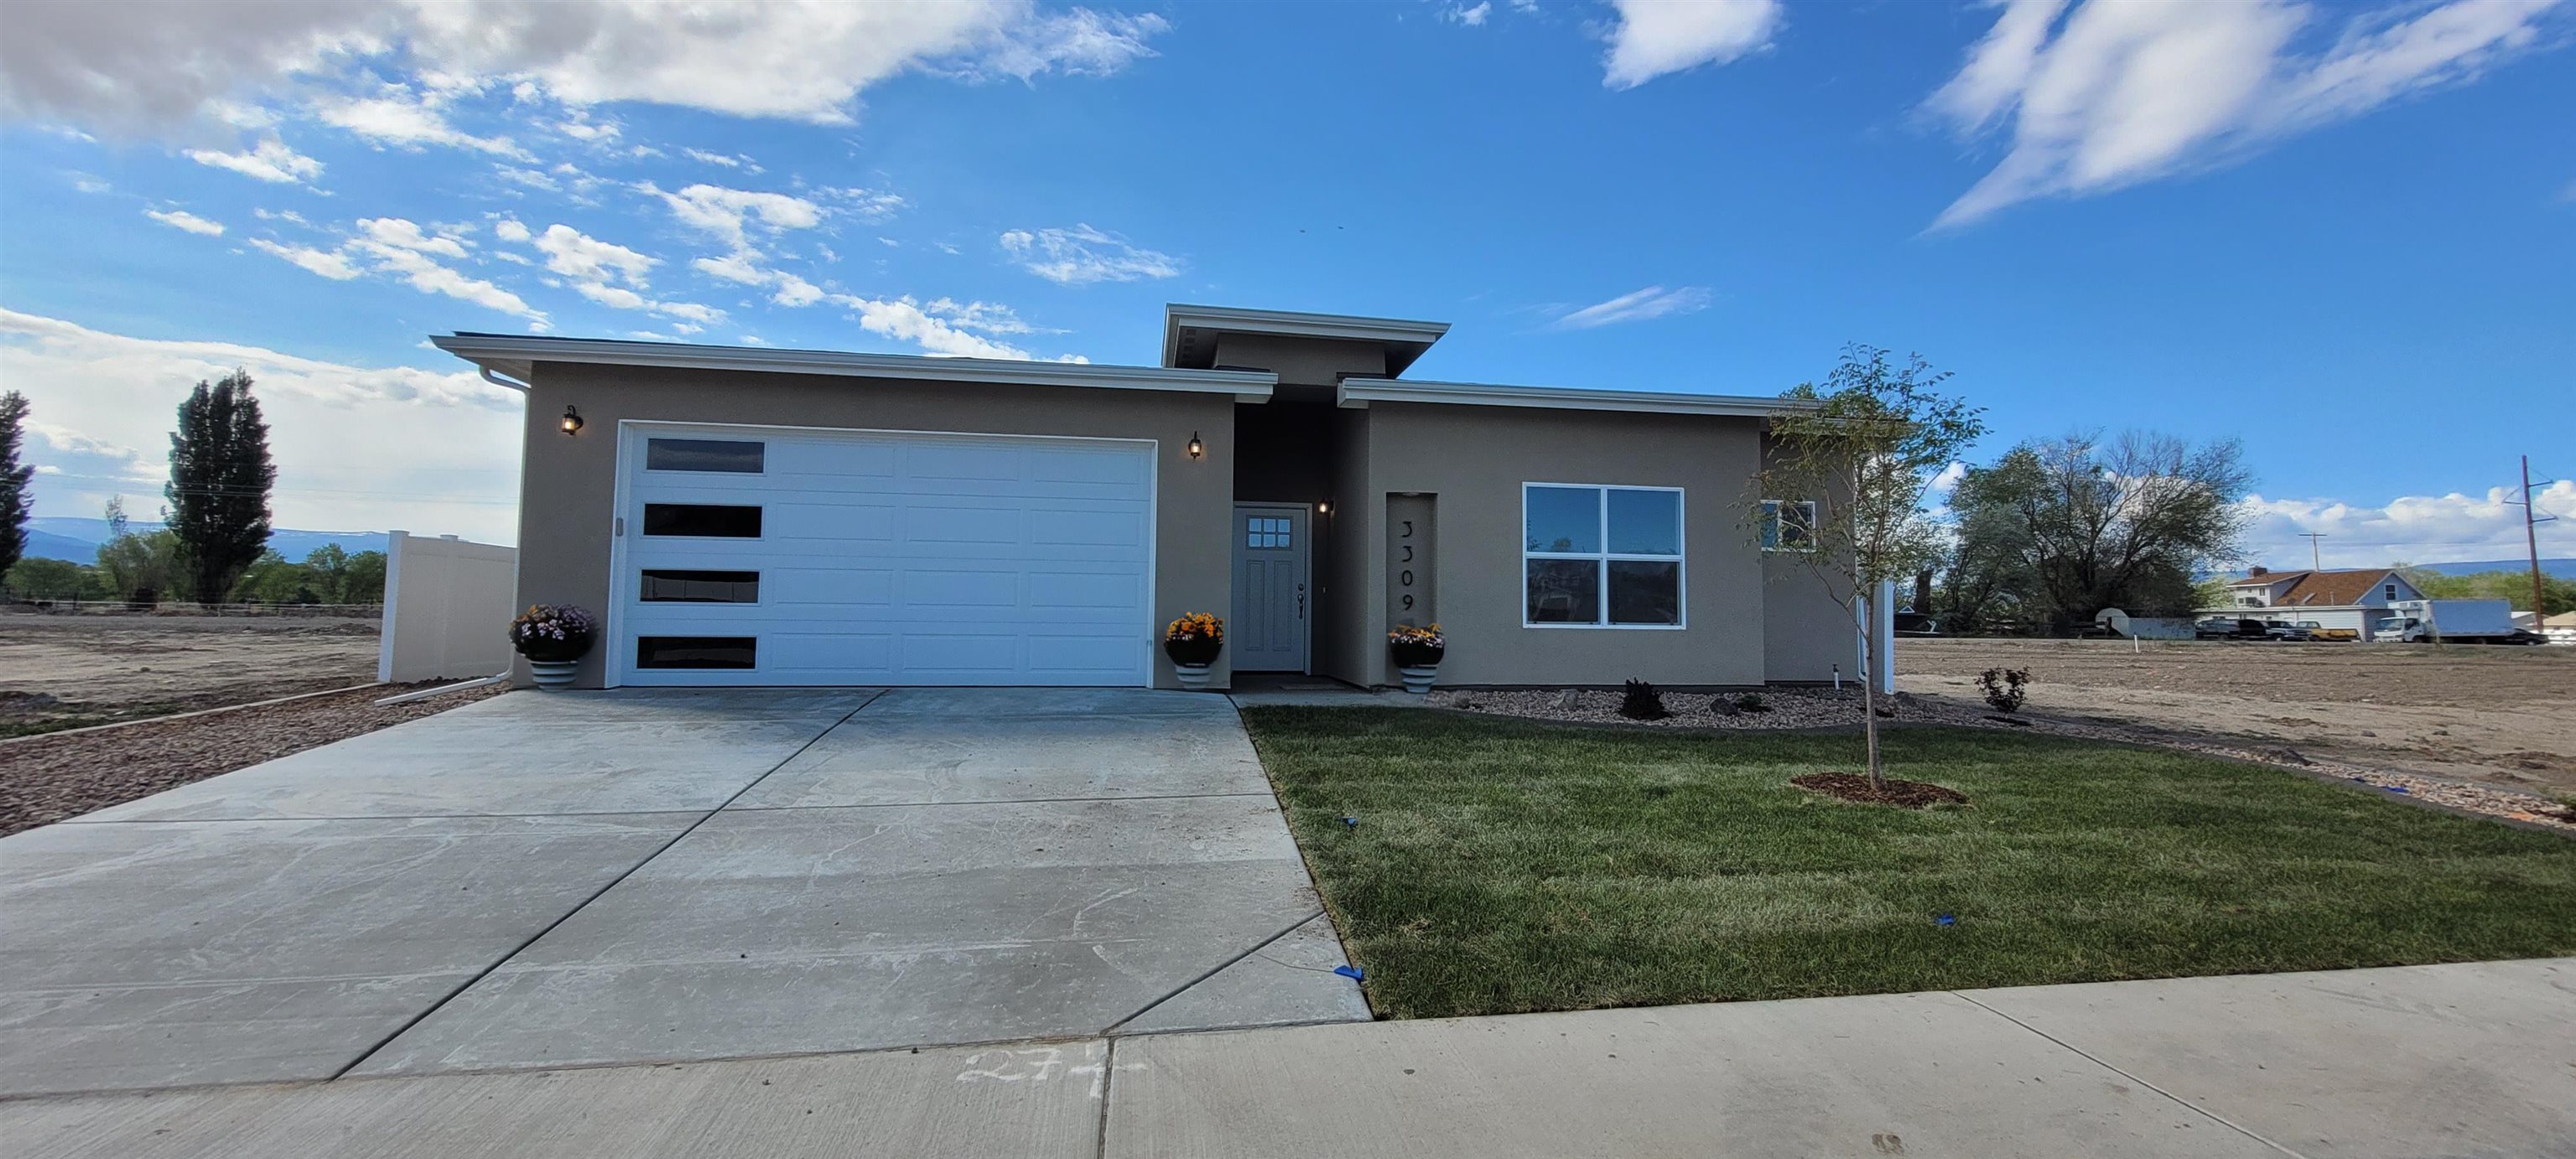 Use Builders' preferred lender and get 1% in closing costs OR CRA FINANCING TO POTENTIALLY SAVE HUNDRDS OF $$/ MO ON PAYMENTS (CALL FOR DETAILS).  PICK LOT & FLOORPLAN OR GO CUSTOM IN VISTA MESA!! AMAZING Grand Mesa views from this new neighborhood just south east of 33 & E Roads! 3/4 Mile to the Riverfront Trail & 1/2 mile to the new Mesa Co Community Campus with library, early childhood ed center & more . INCLUDES LANDSCAPING & FENCING.. Single level rancher with split floorplan, 1757 square feet, 3 bedrooms, 3 baths, open nice great room area for friends and family gatherings, 2 car garage and RV parking. Estimated Completion 2/23/24.